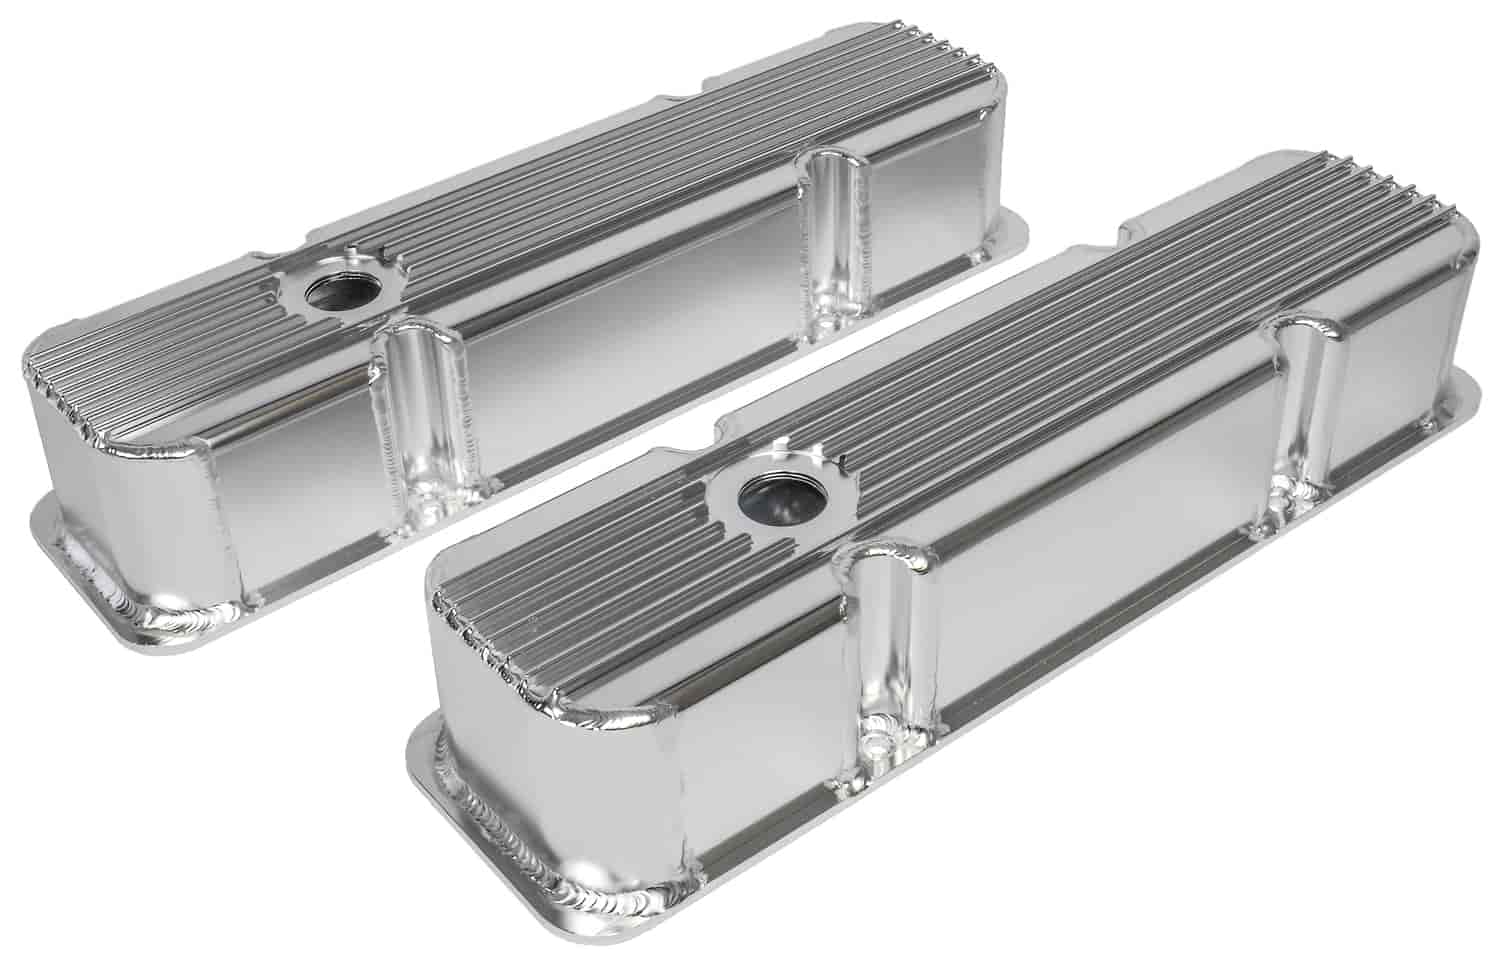 Fabricated Aluminum Valve Covers for Small Block Chevy